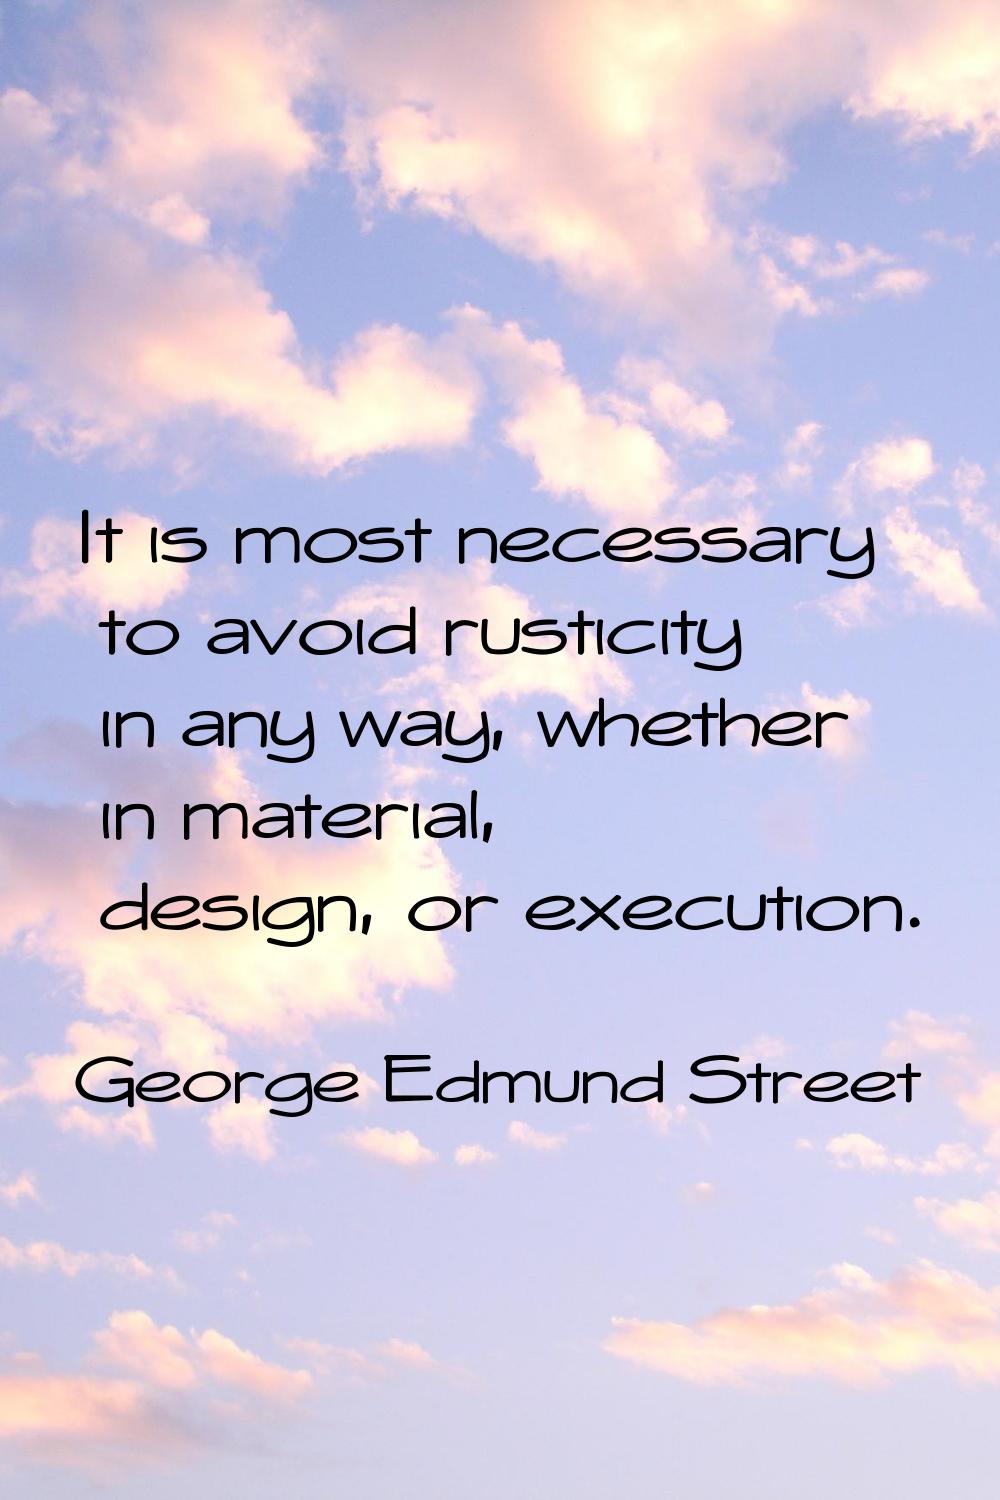 It is most necessary to avoid rusticity in any way, whether in material, design, or execution.